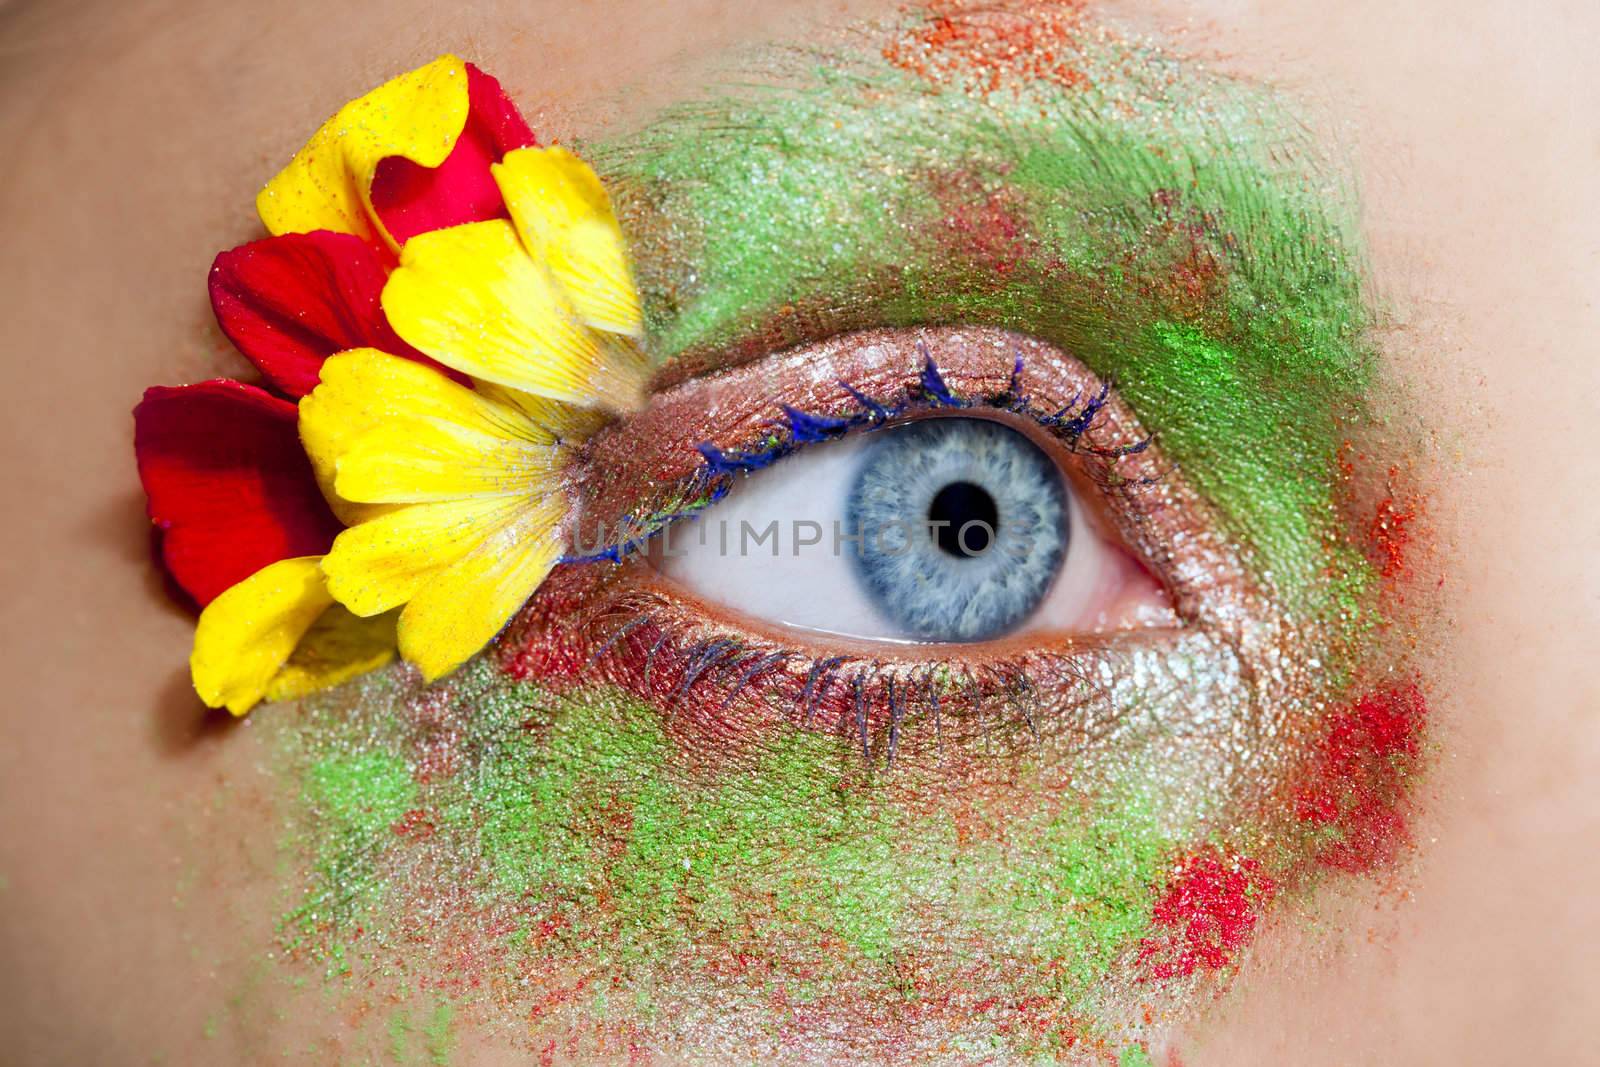 blue woman eye makeup inspired in spring with flowers meadow and yellow petals